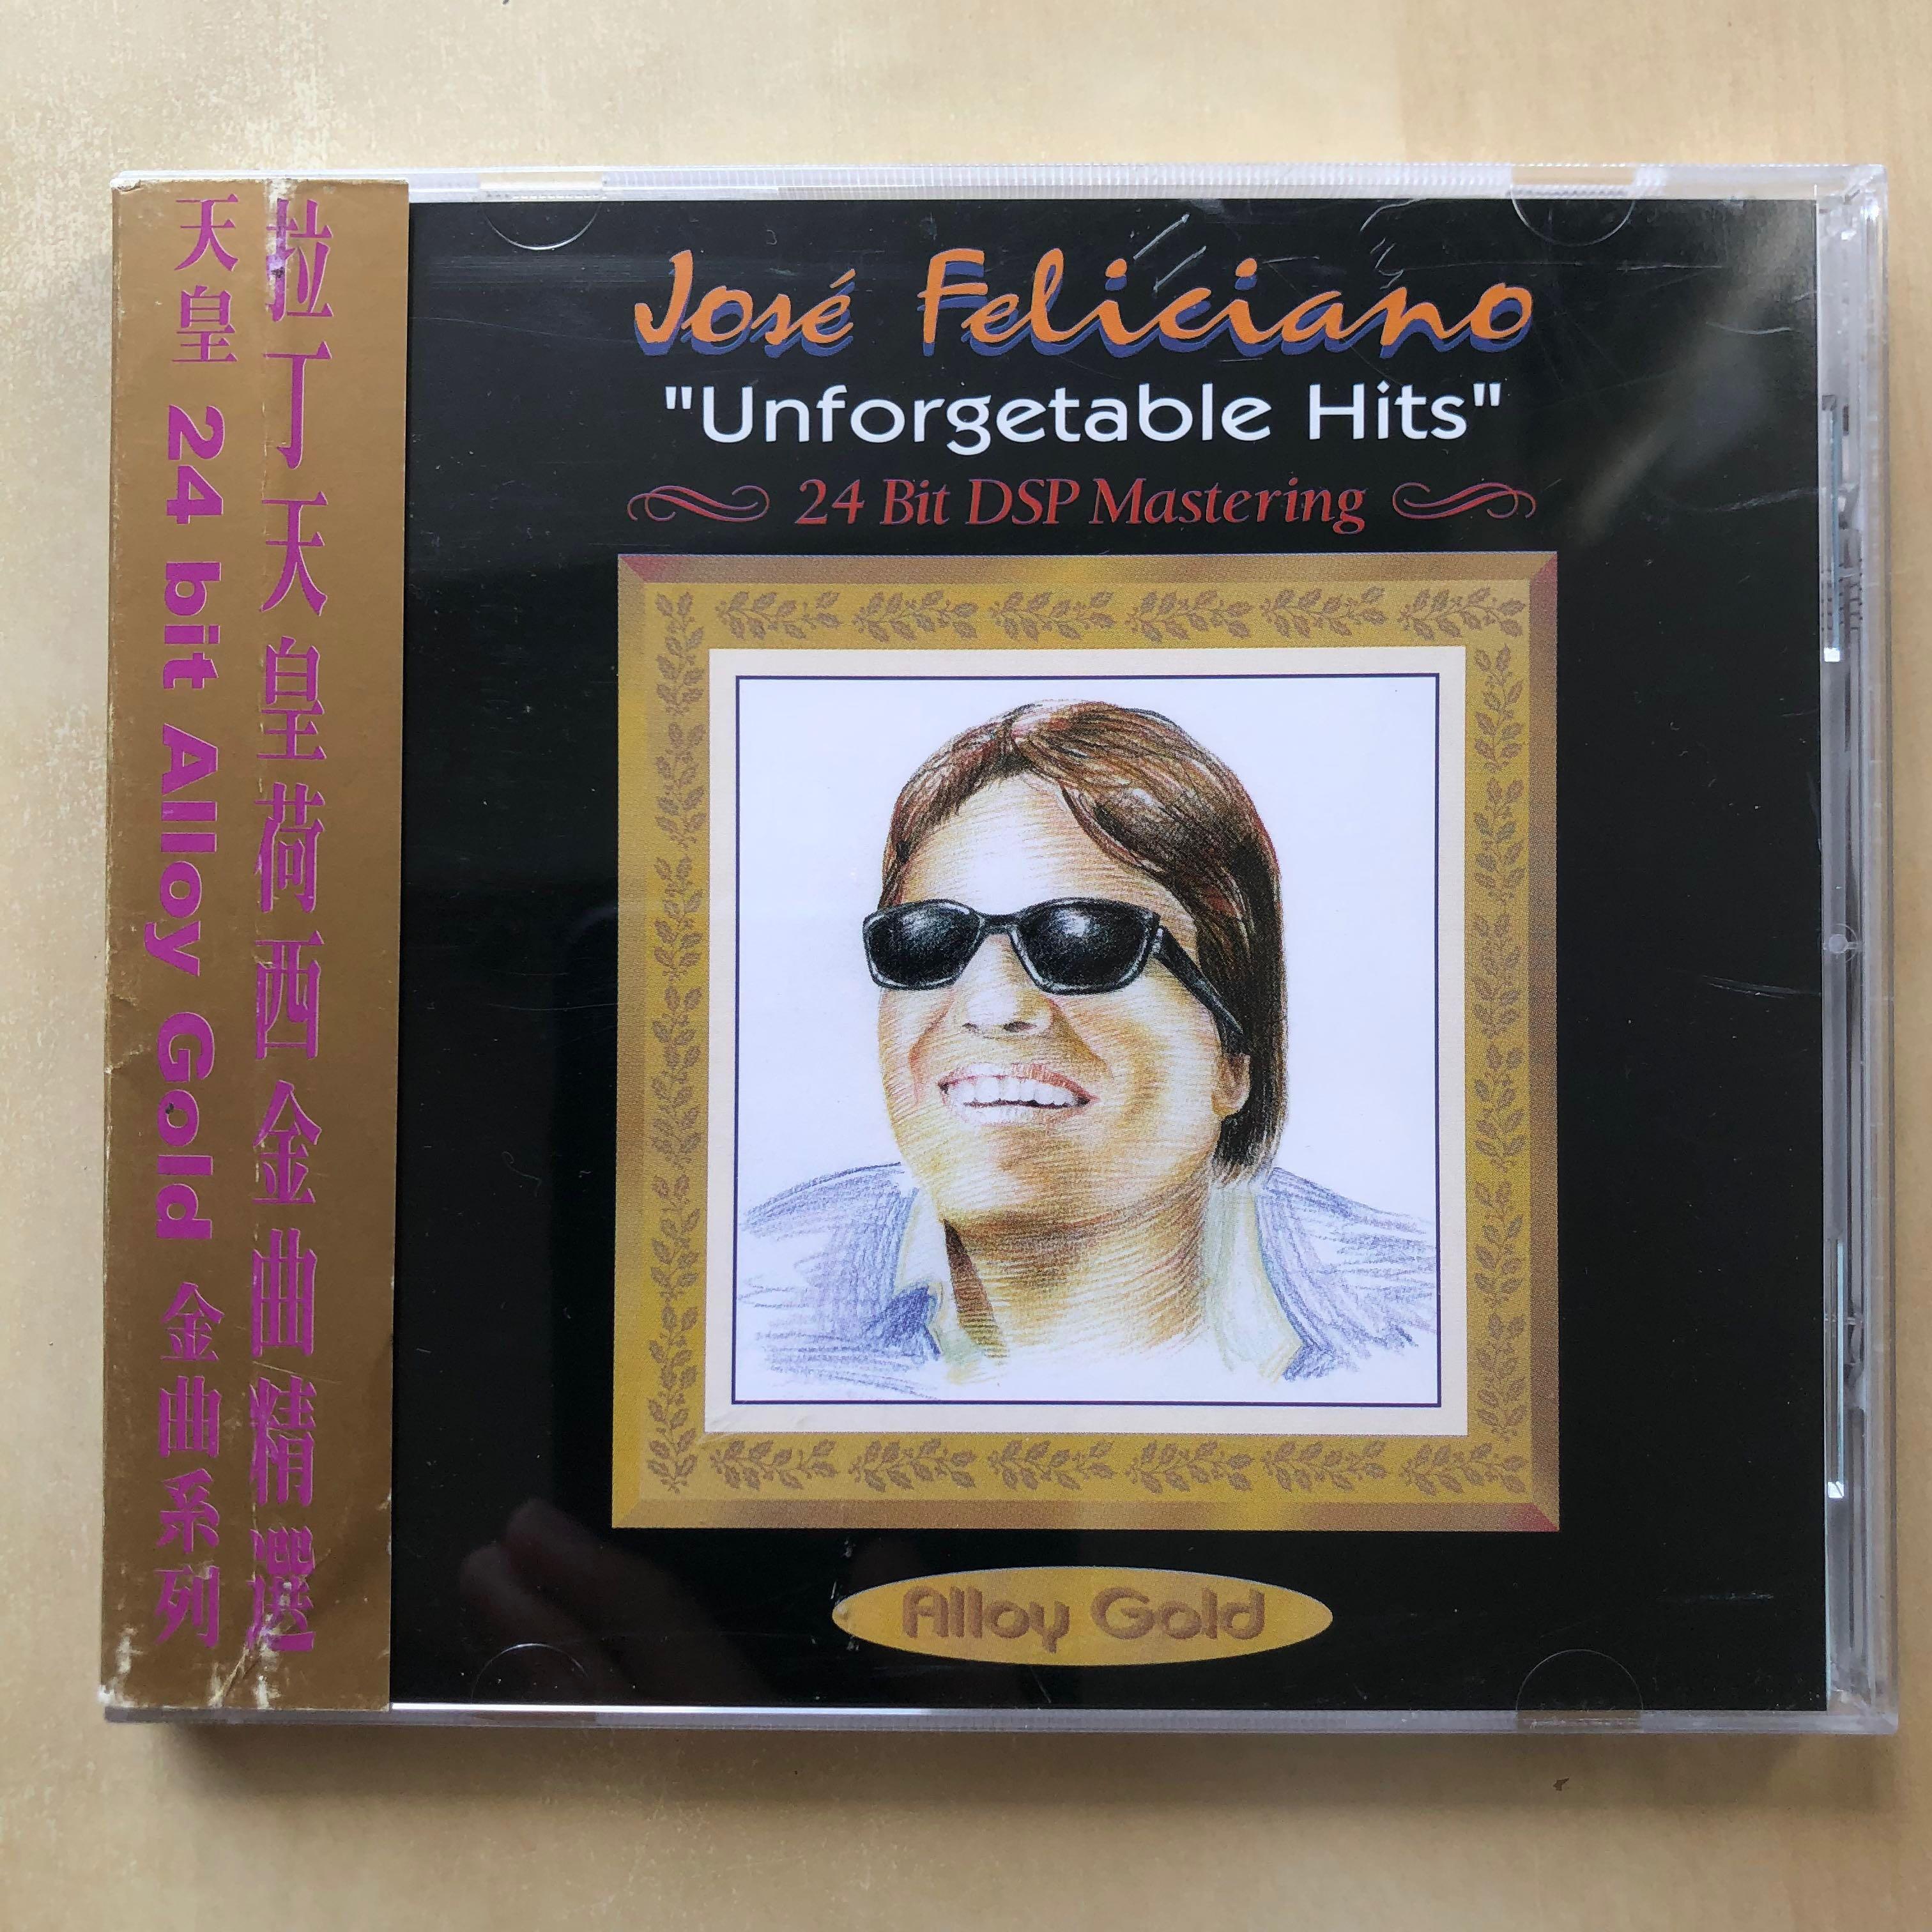 CD丨Jose Feliciano Unforgettable Hits (Alloy Gold) (24 bit DSP